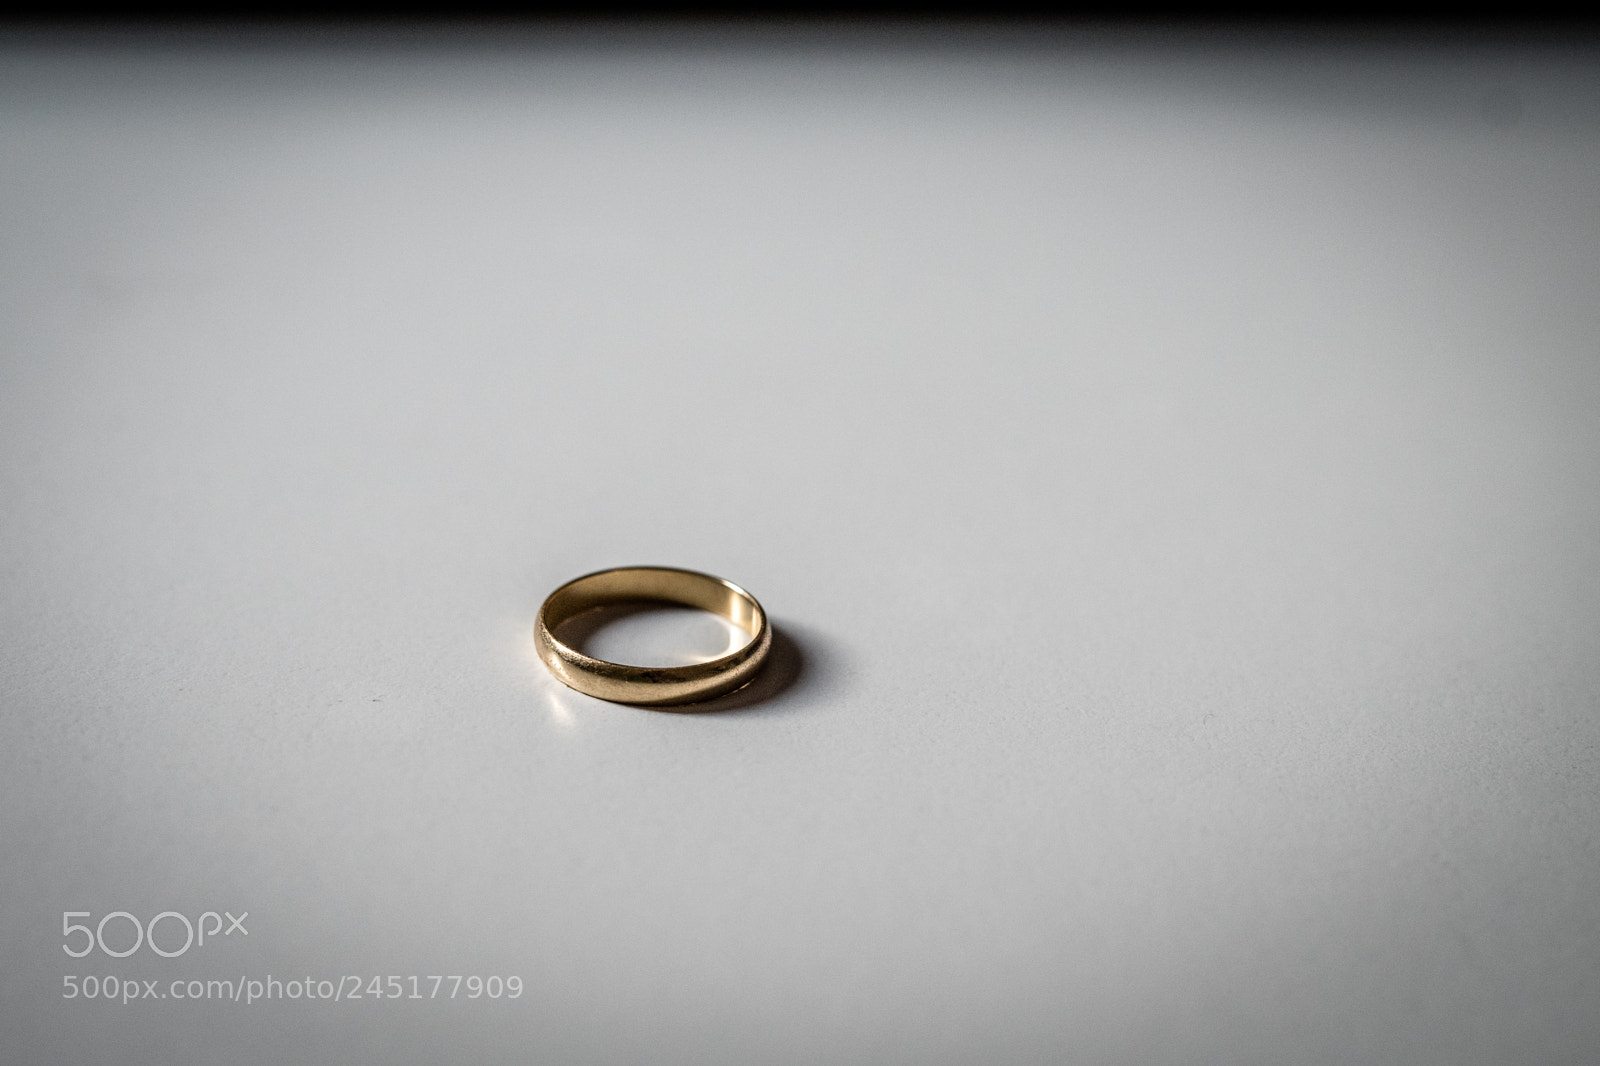 Nikon D500 sample photo. Sauron's ring or marry photography